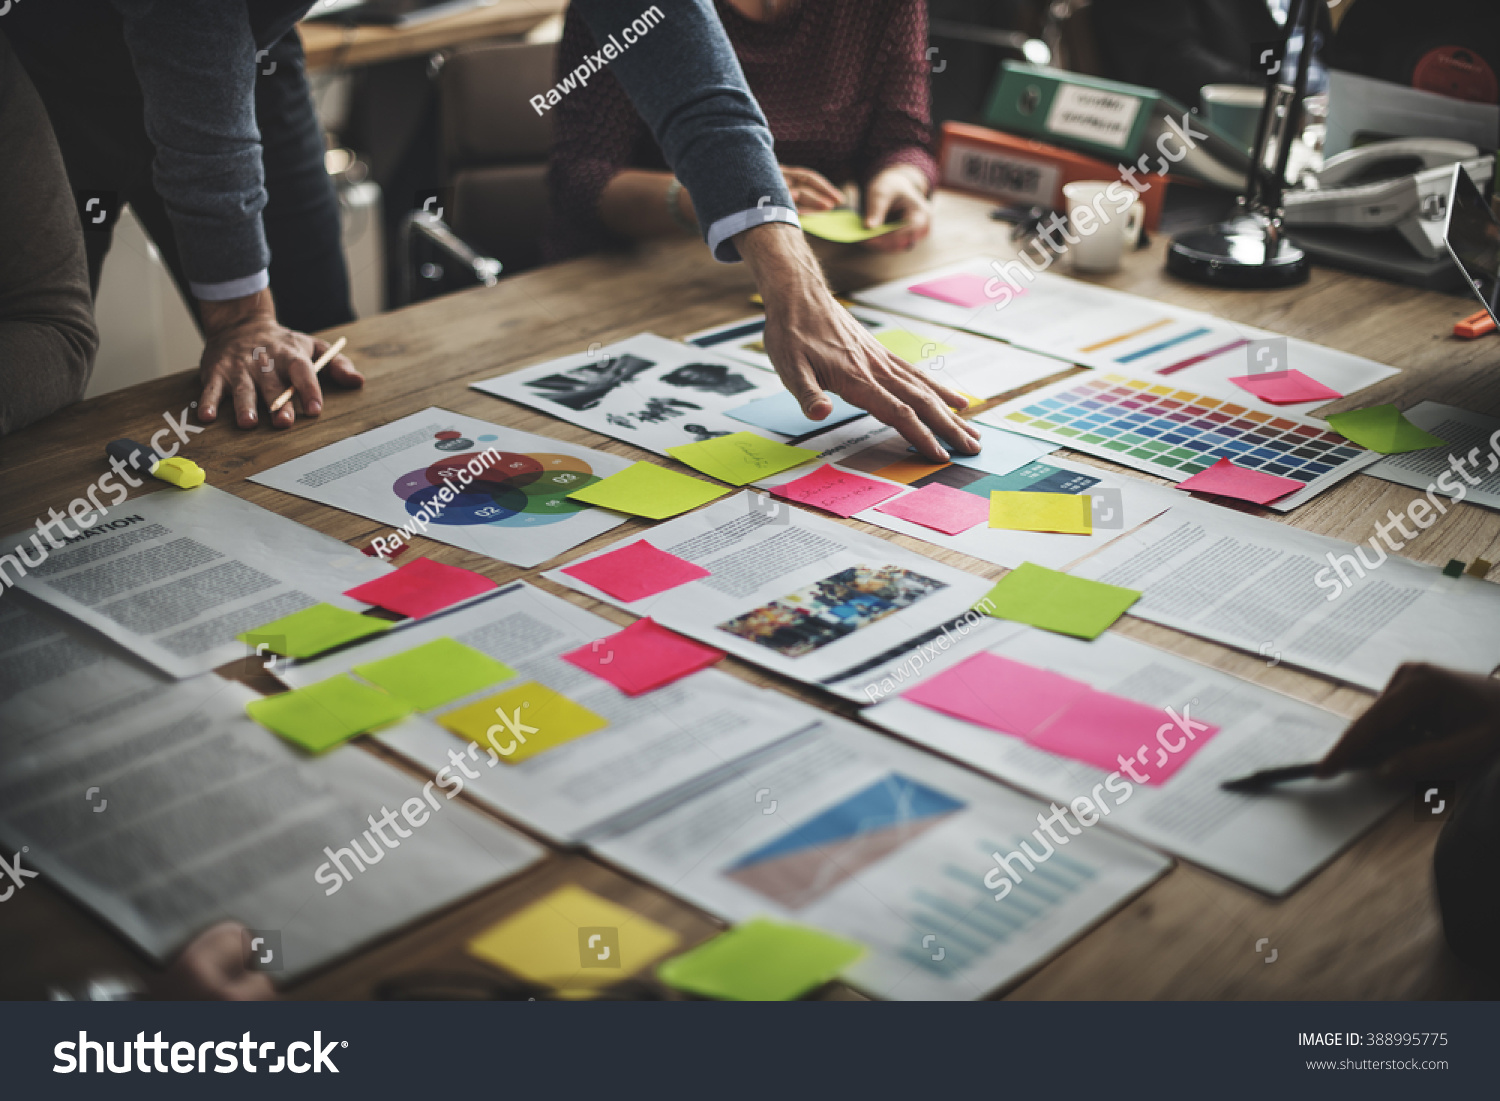 stock-photo-business-people-diverse-brainstorm-meeting-concept-388995775